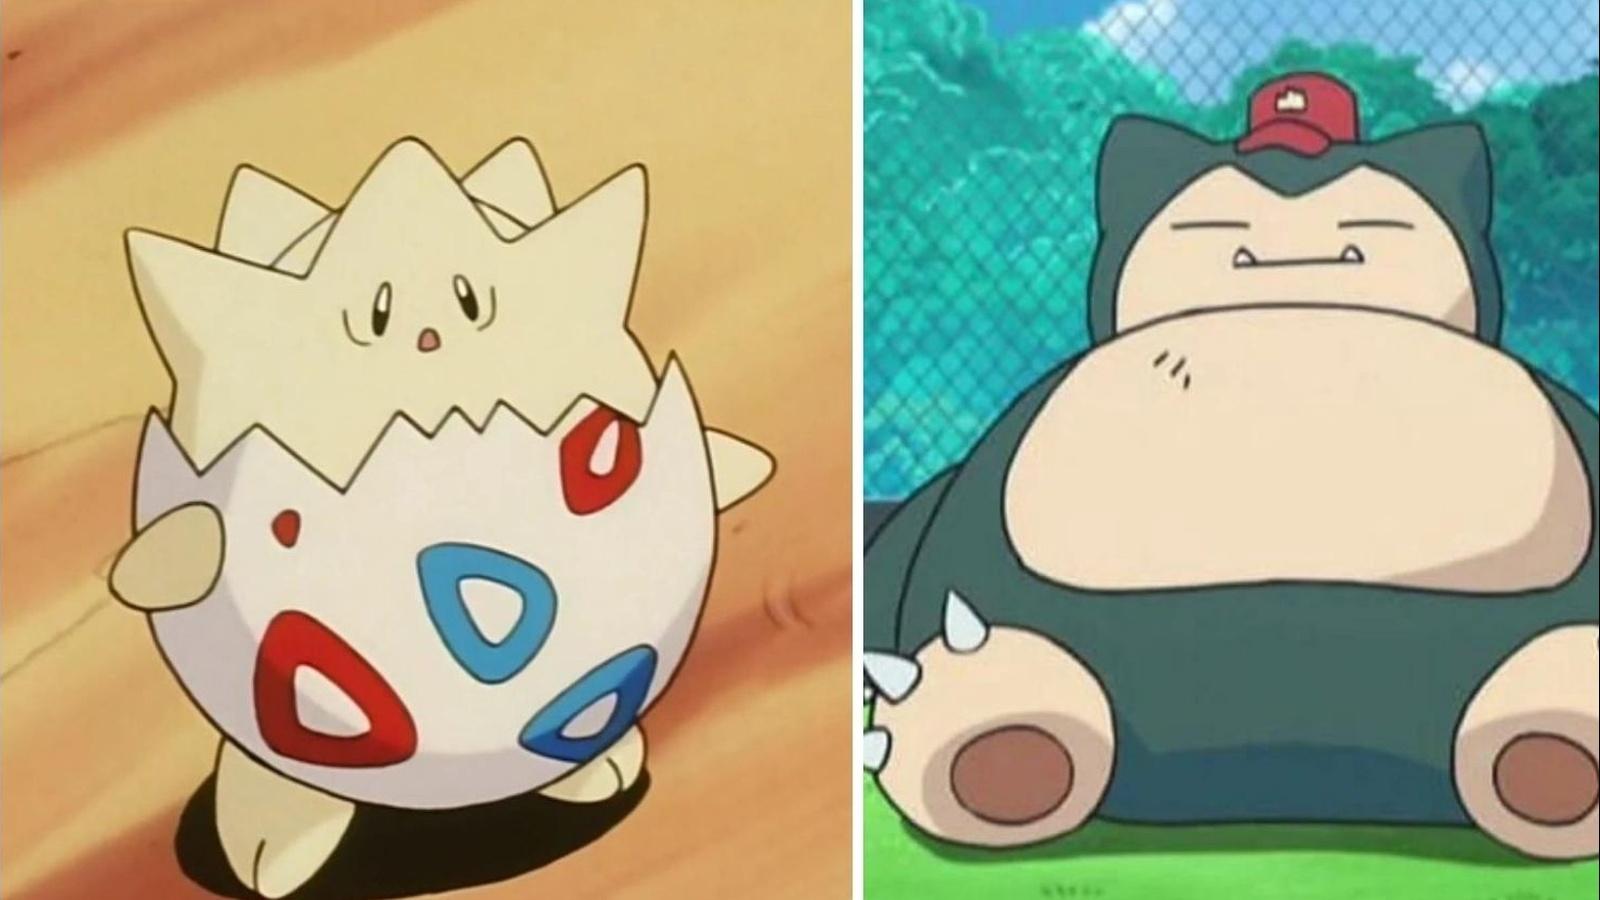 Stills of Togepi and Snorlax from the Pokemon Anime